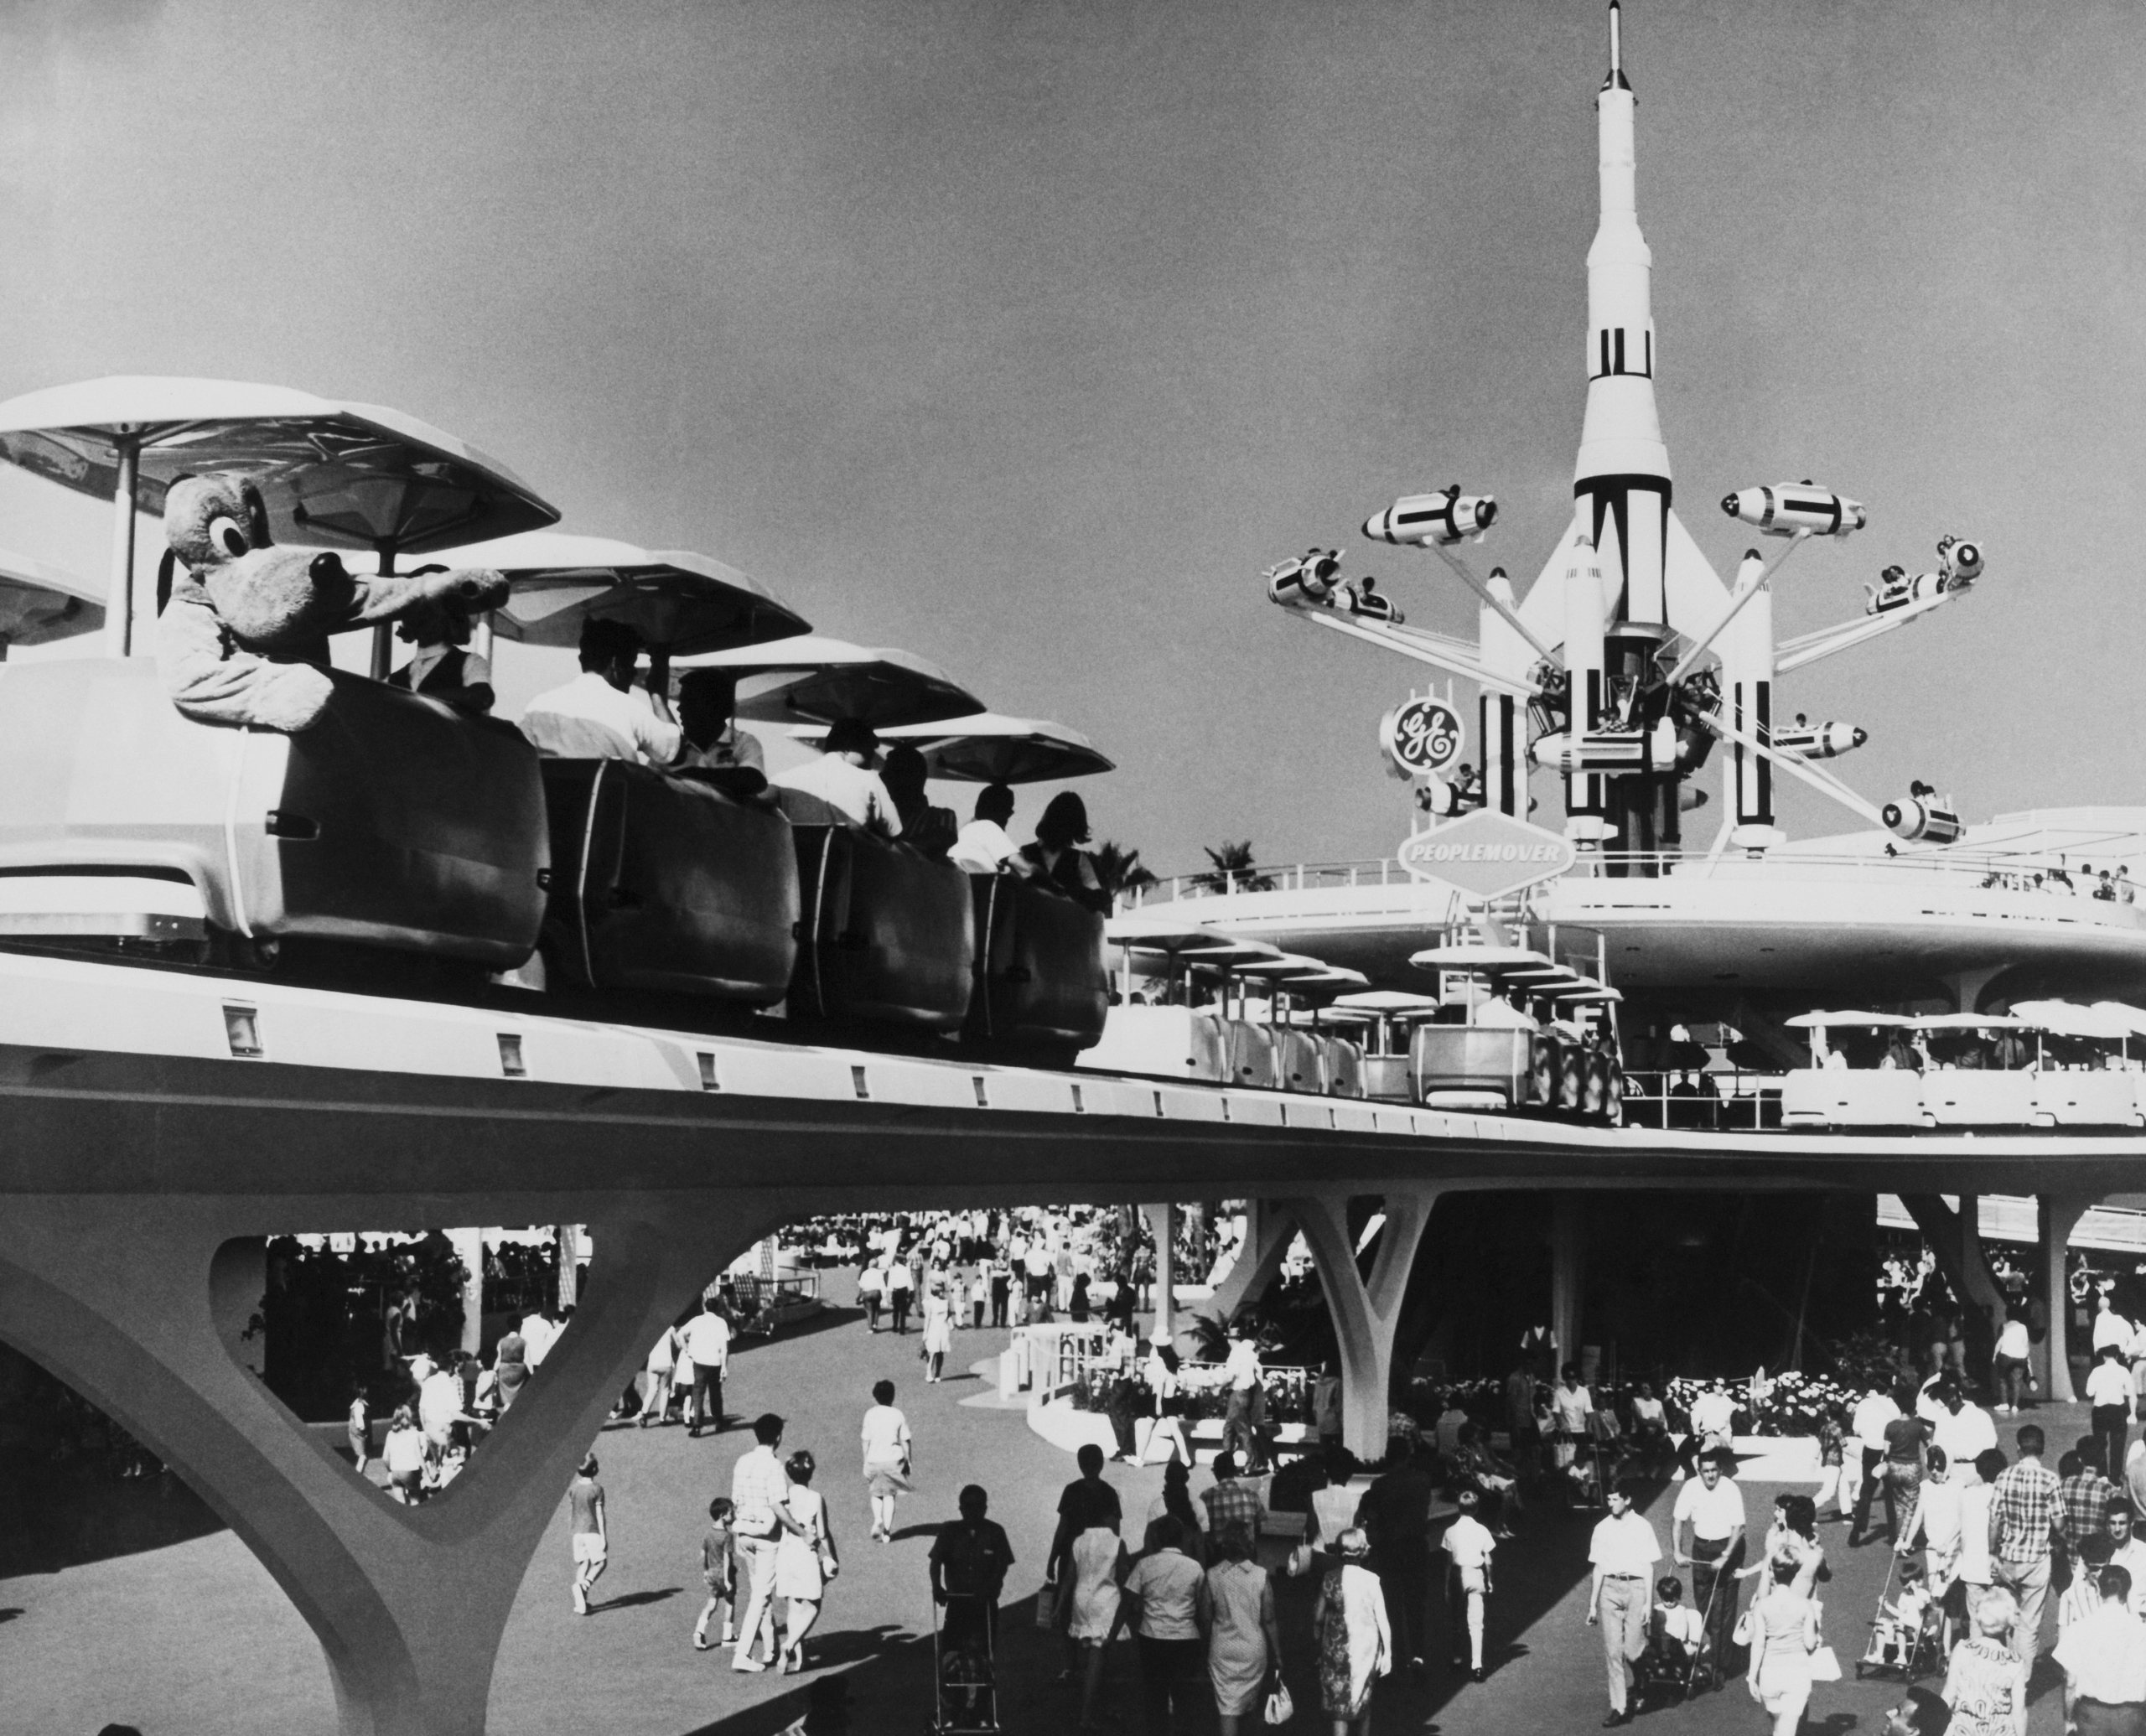 Tomorrowland, People Mover At Disneyland Park In California